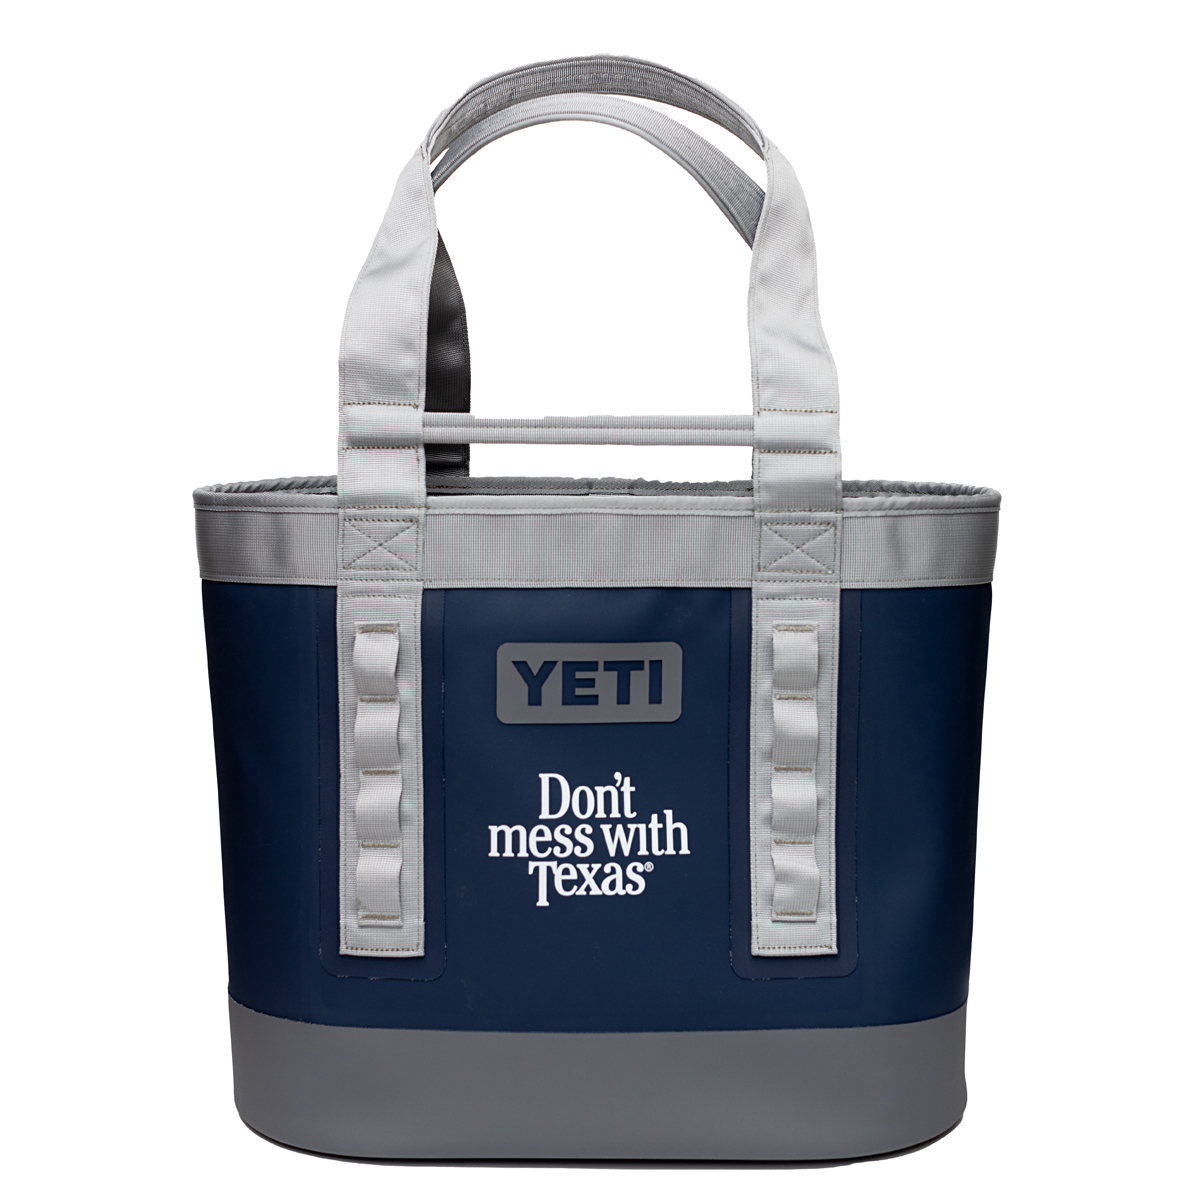 Don't mess with Texas, Camino® 35 Carryall Tote